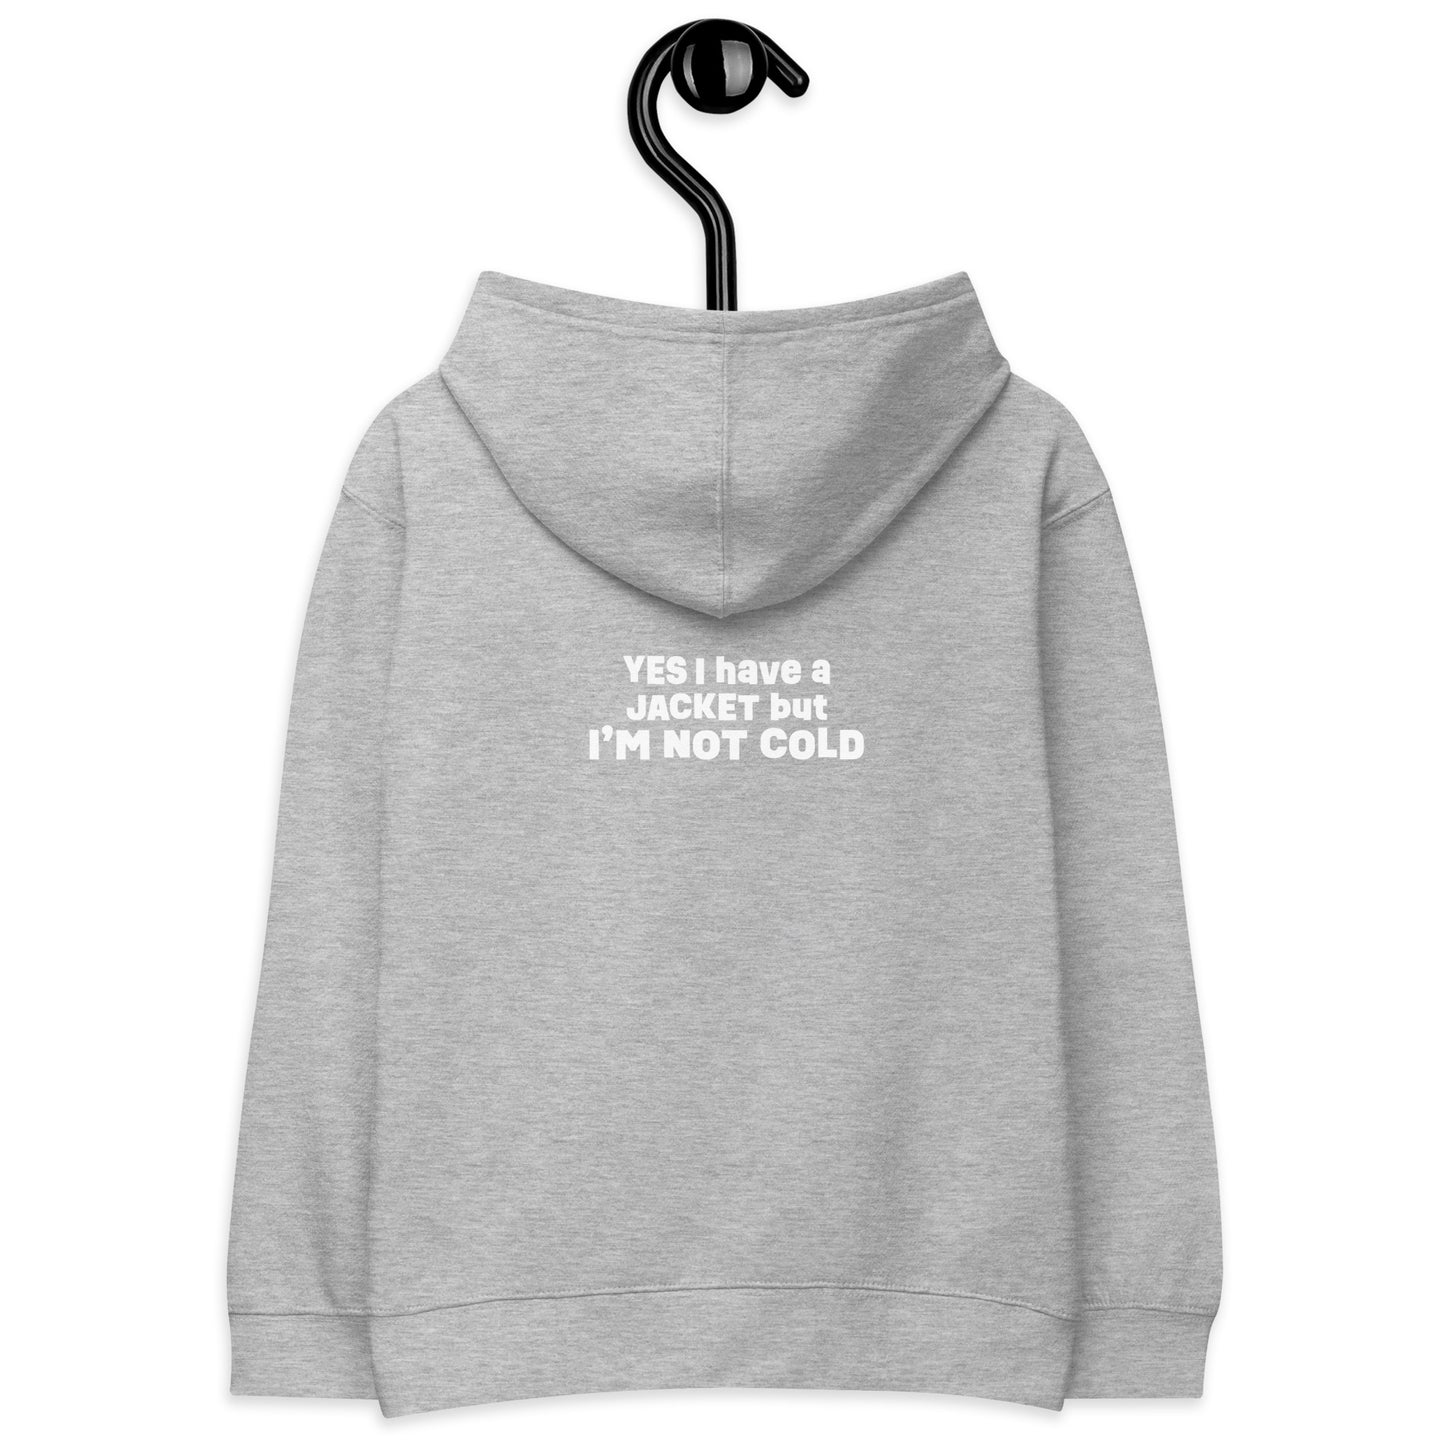 I'm Not Cold - hoodie (kids sizes)